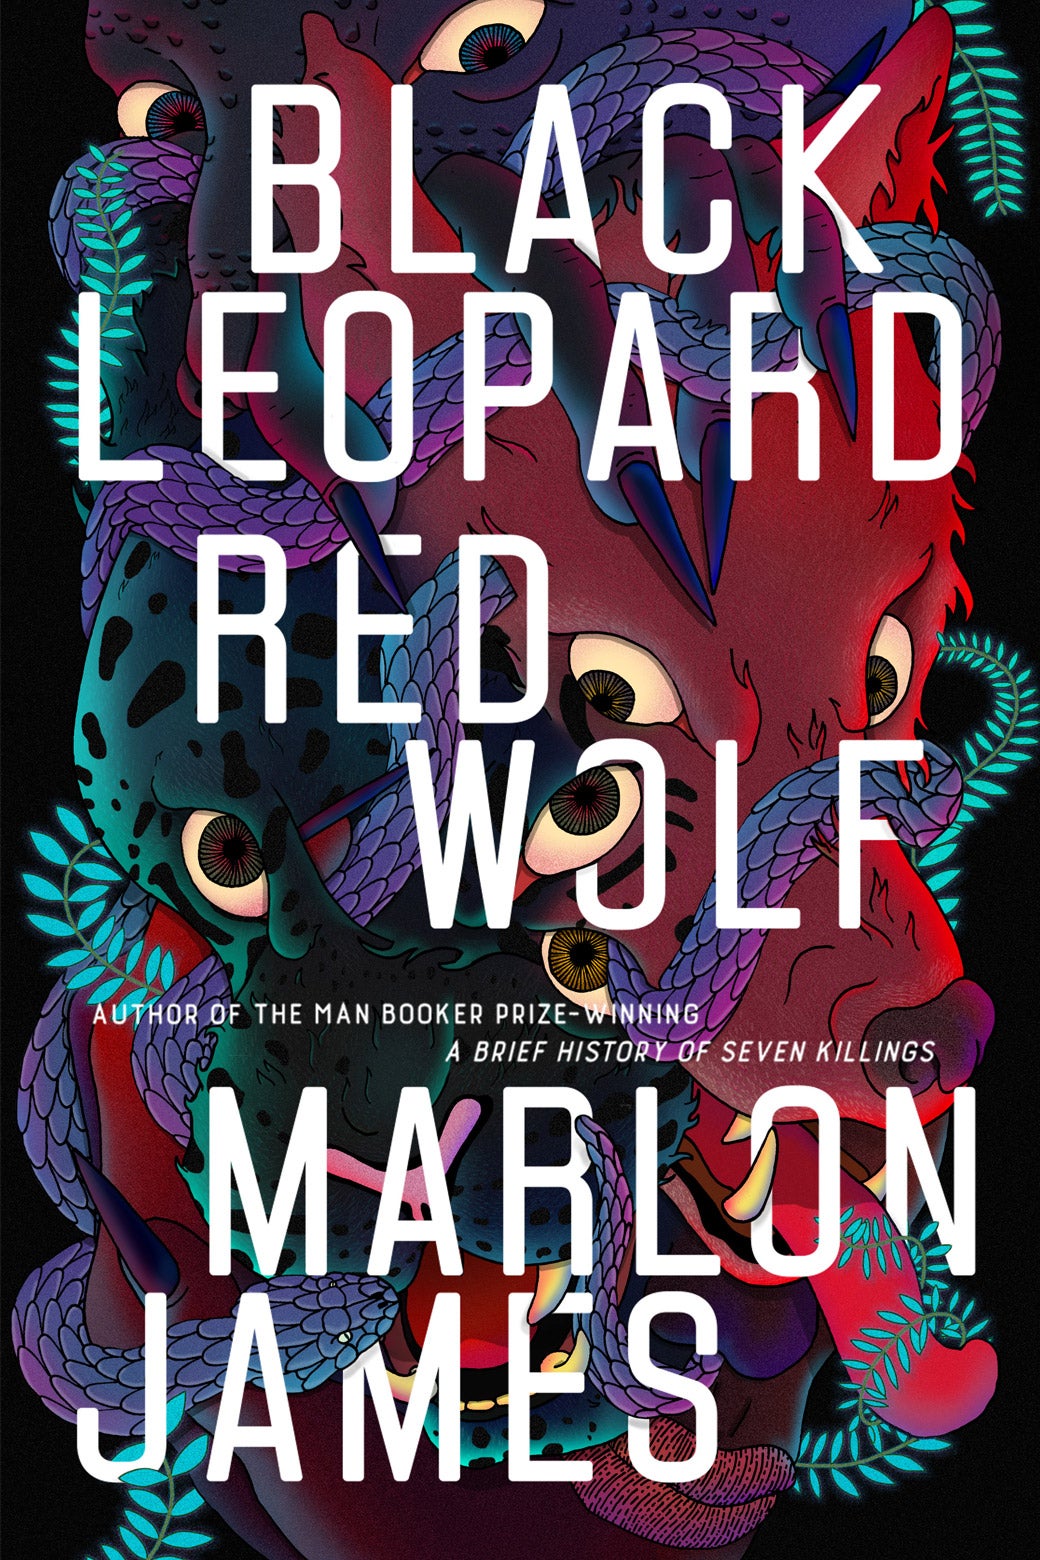 Book cover of Black Leopard, Red Wolf.